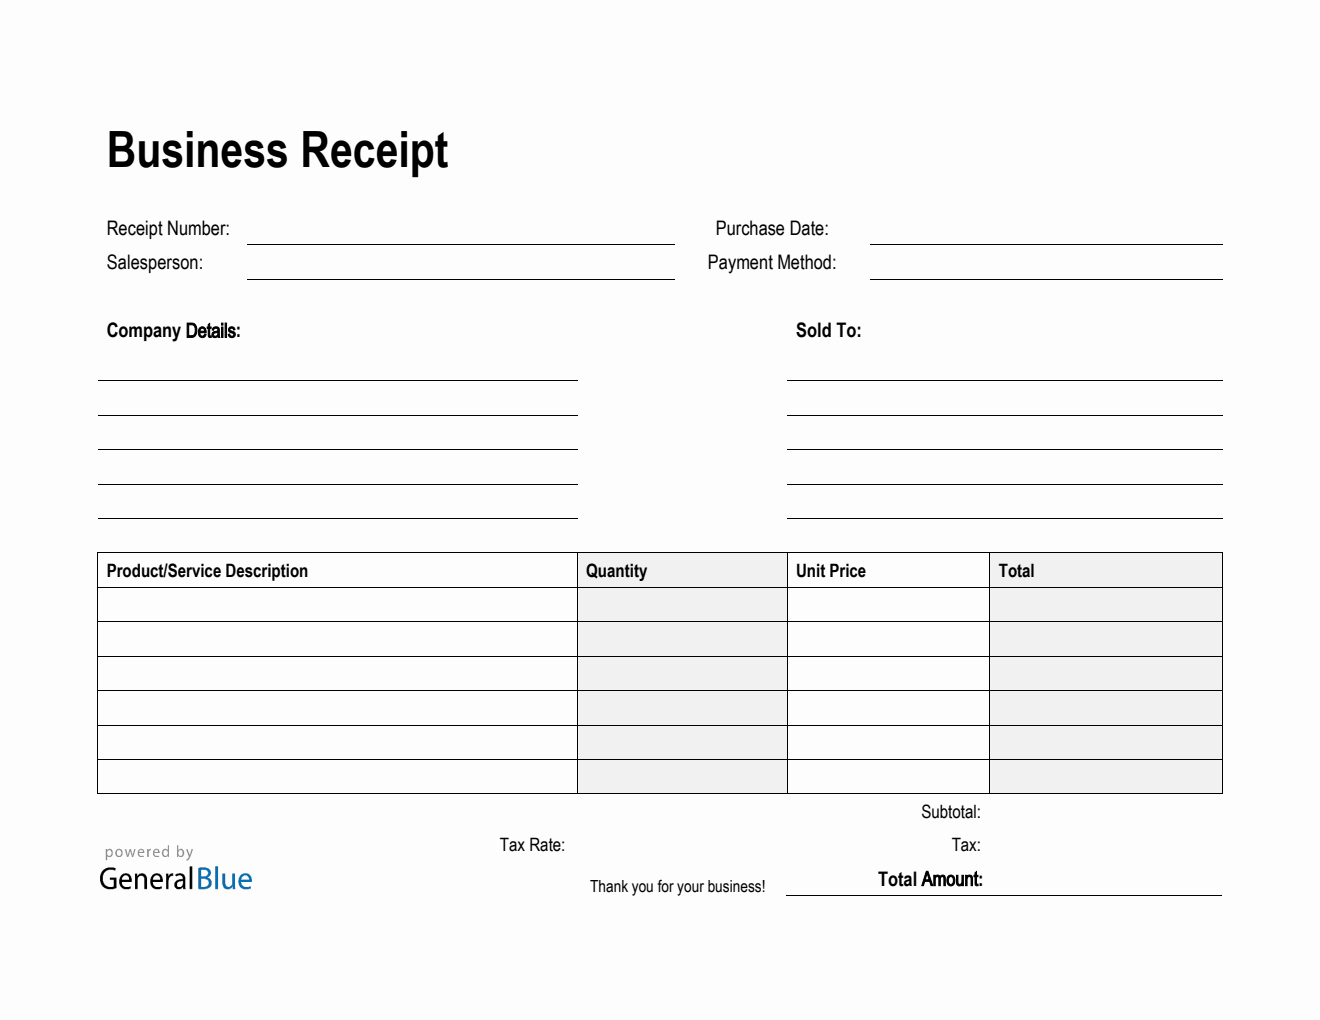 Simple Business Receipt Template in PDF